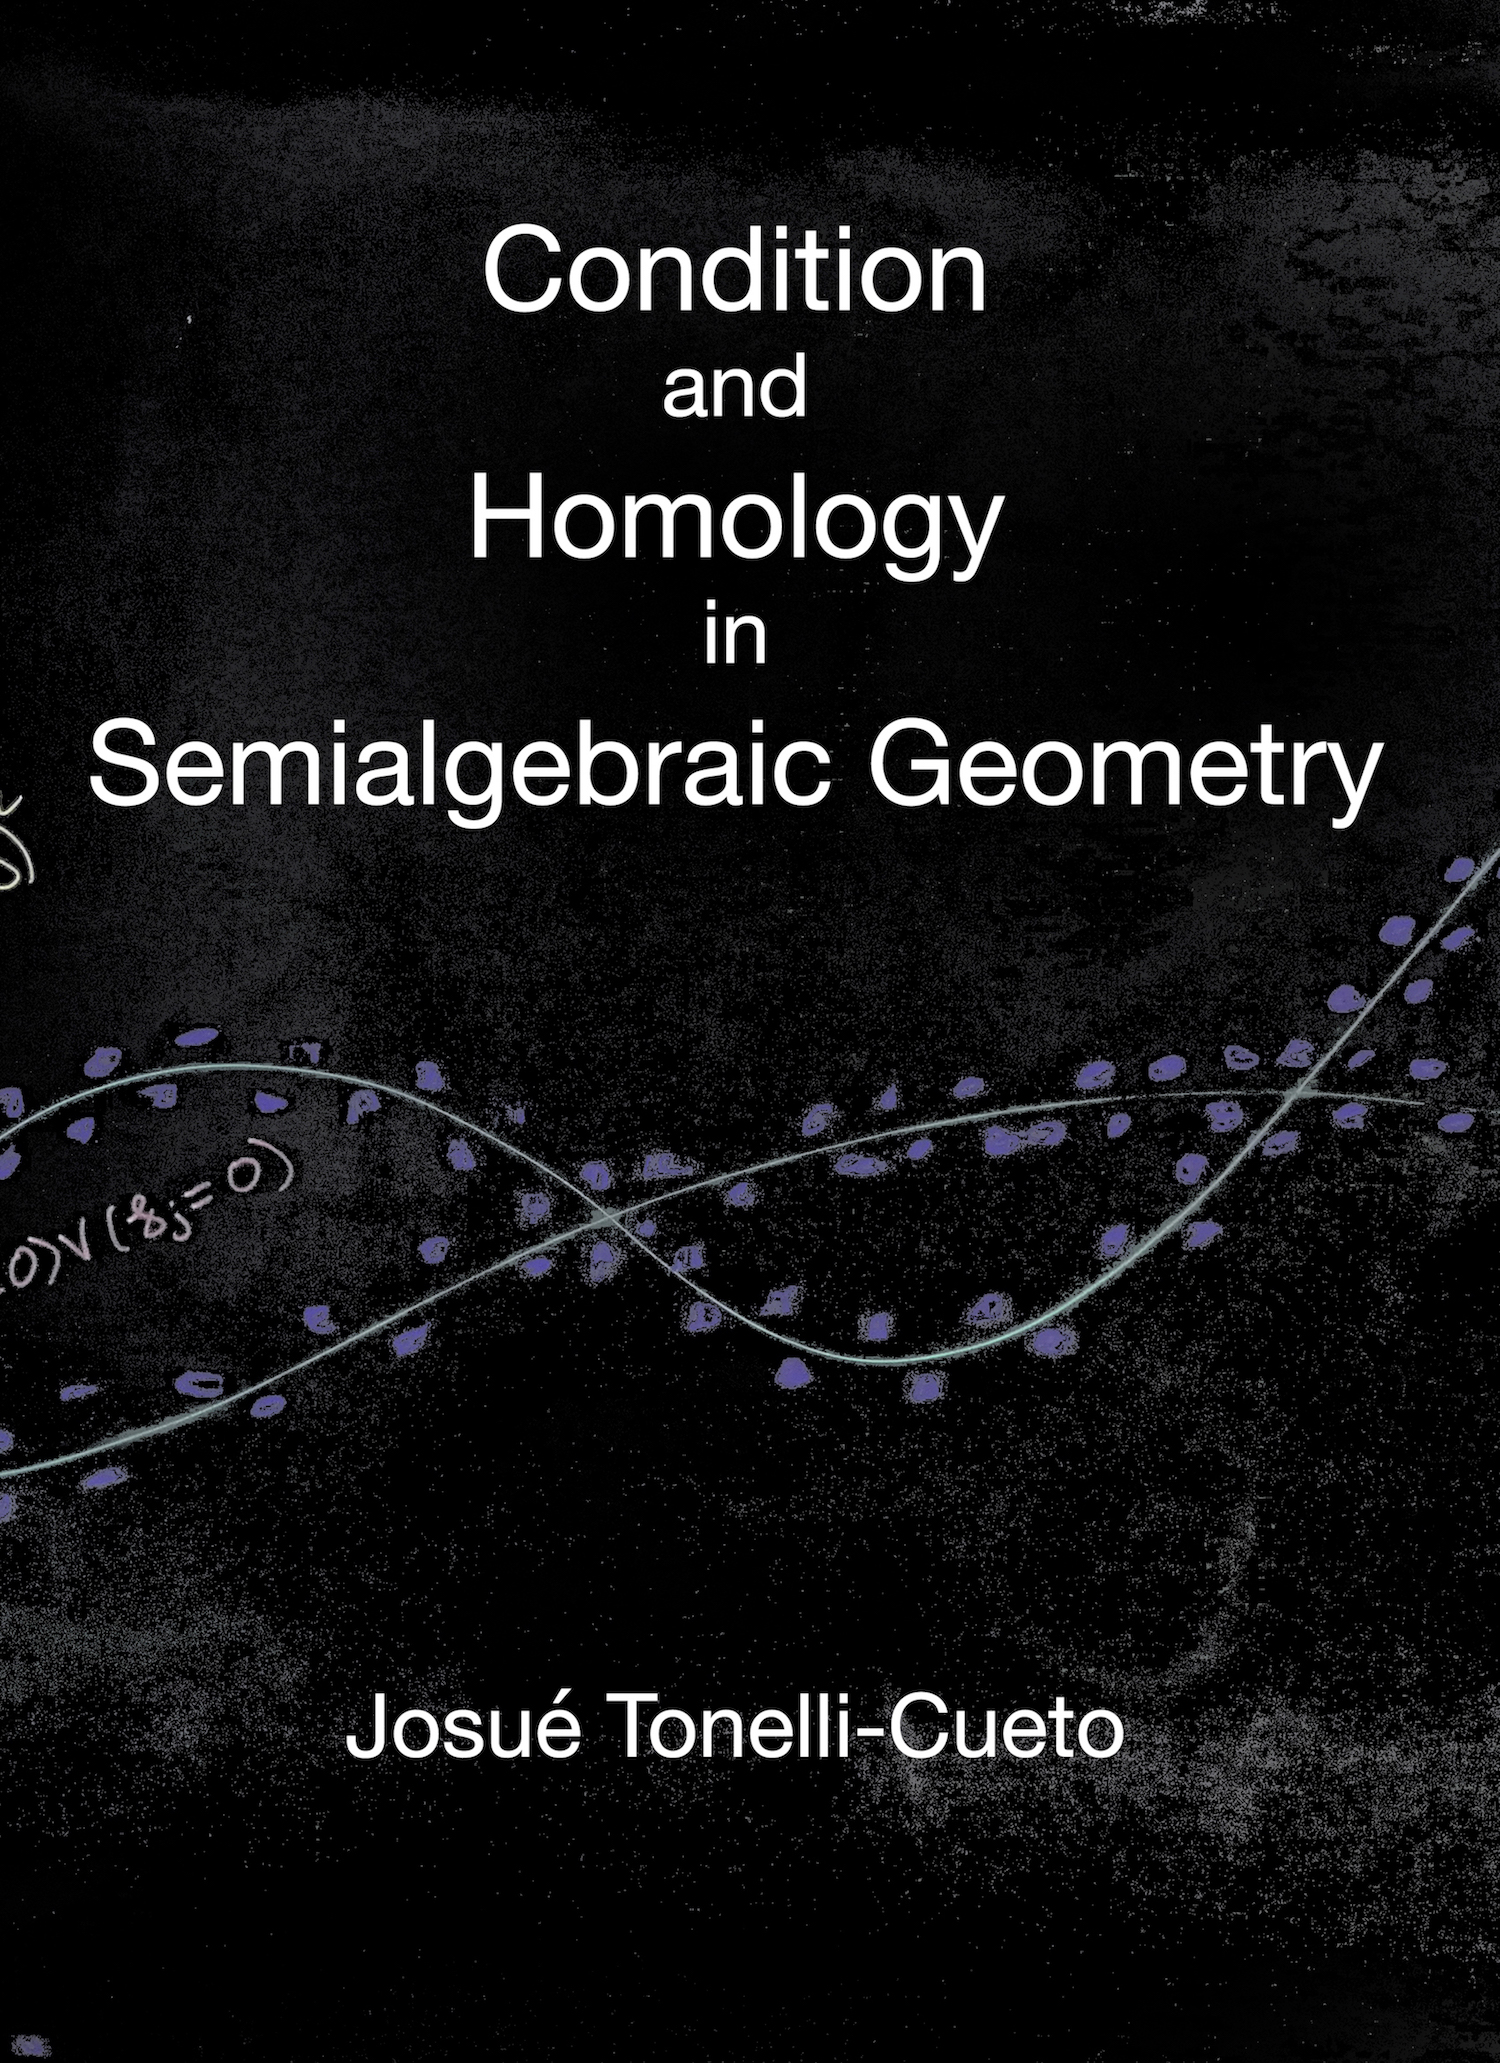 Cover page of Conditionand Homology in Semialgebraic Geometry by Josué Tonelli-Cueto